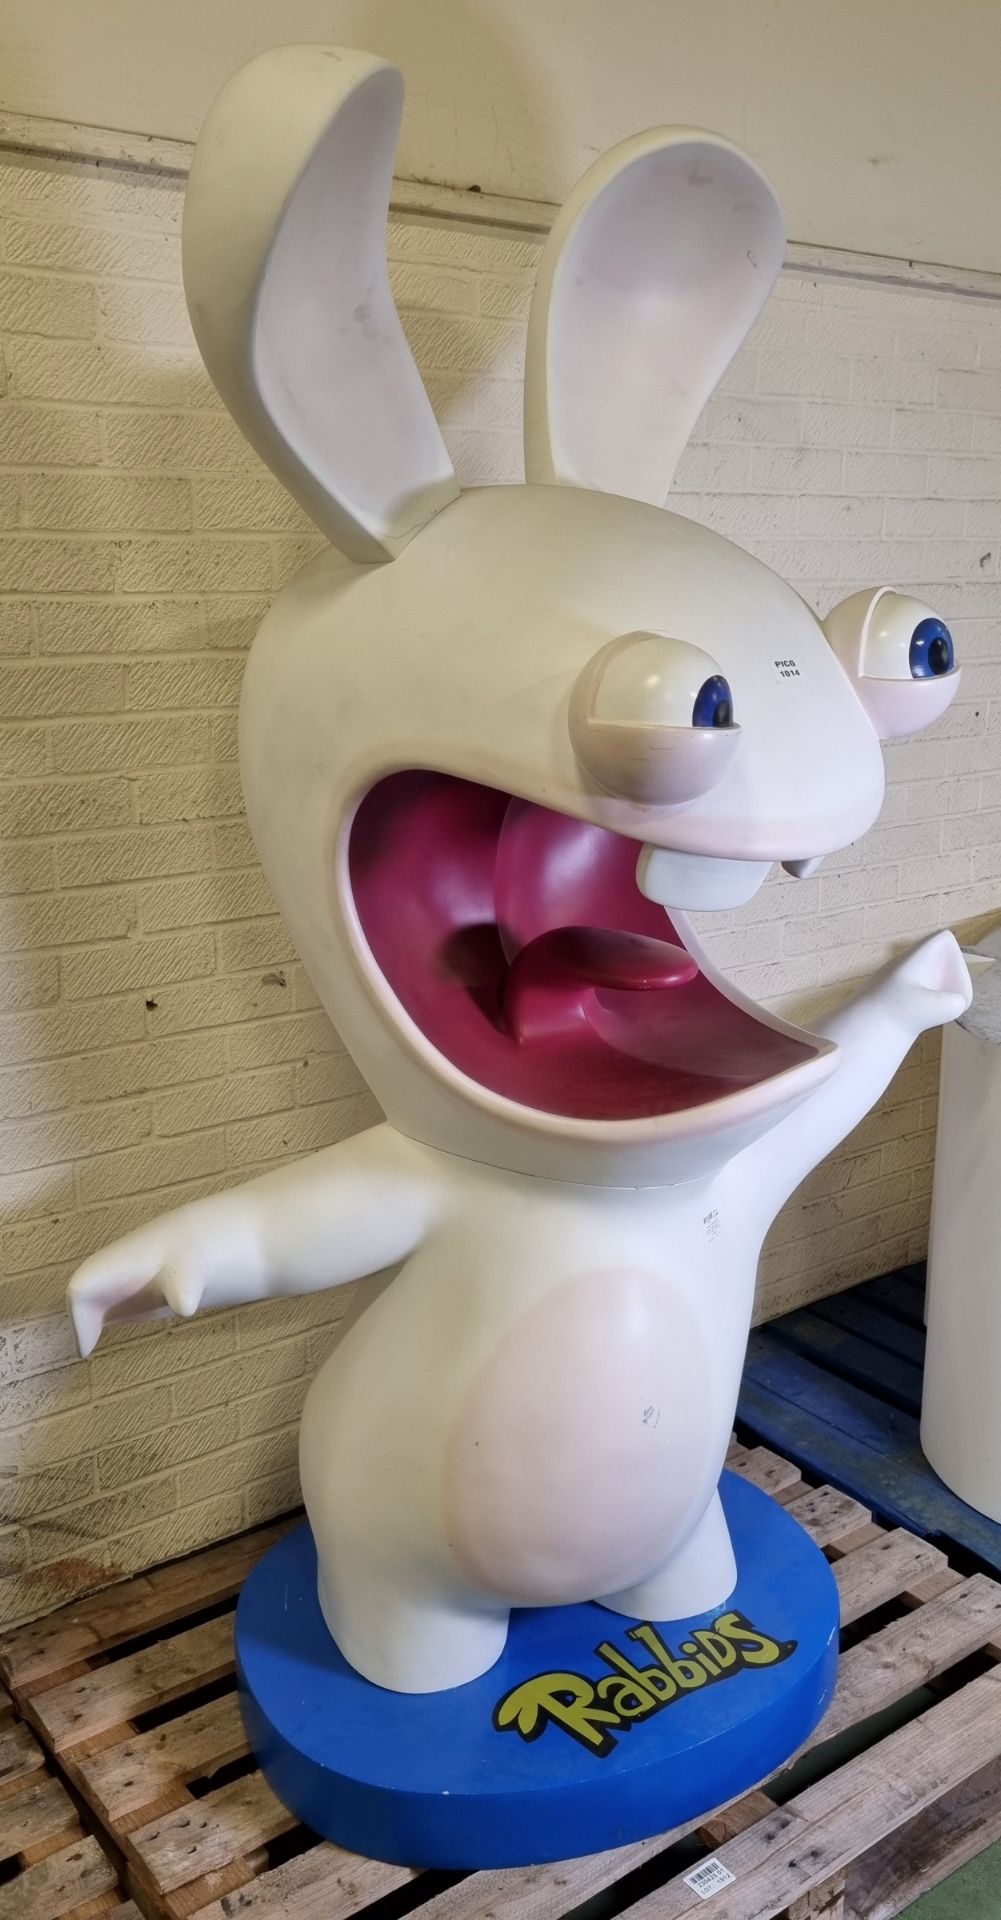 Raving Rabbids large exhibition display figure - W 1250 x D 850 x H 2000mm (approx) - Image 2 of 5